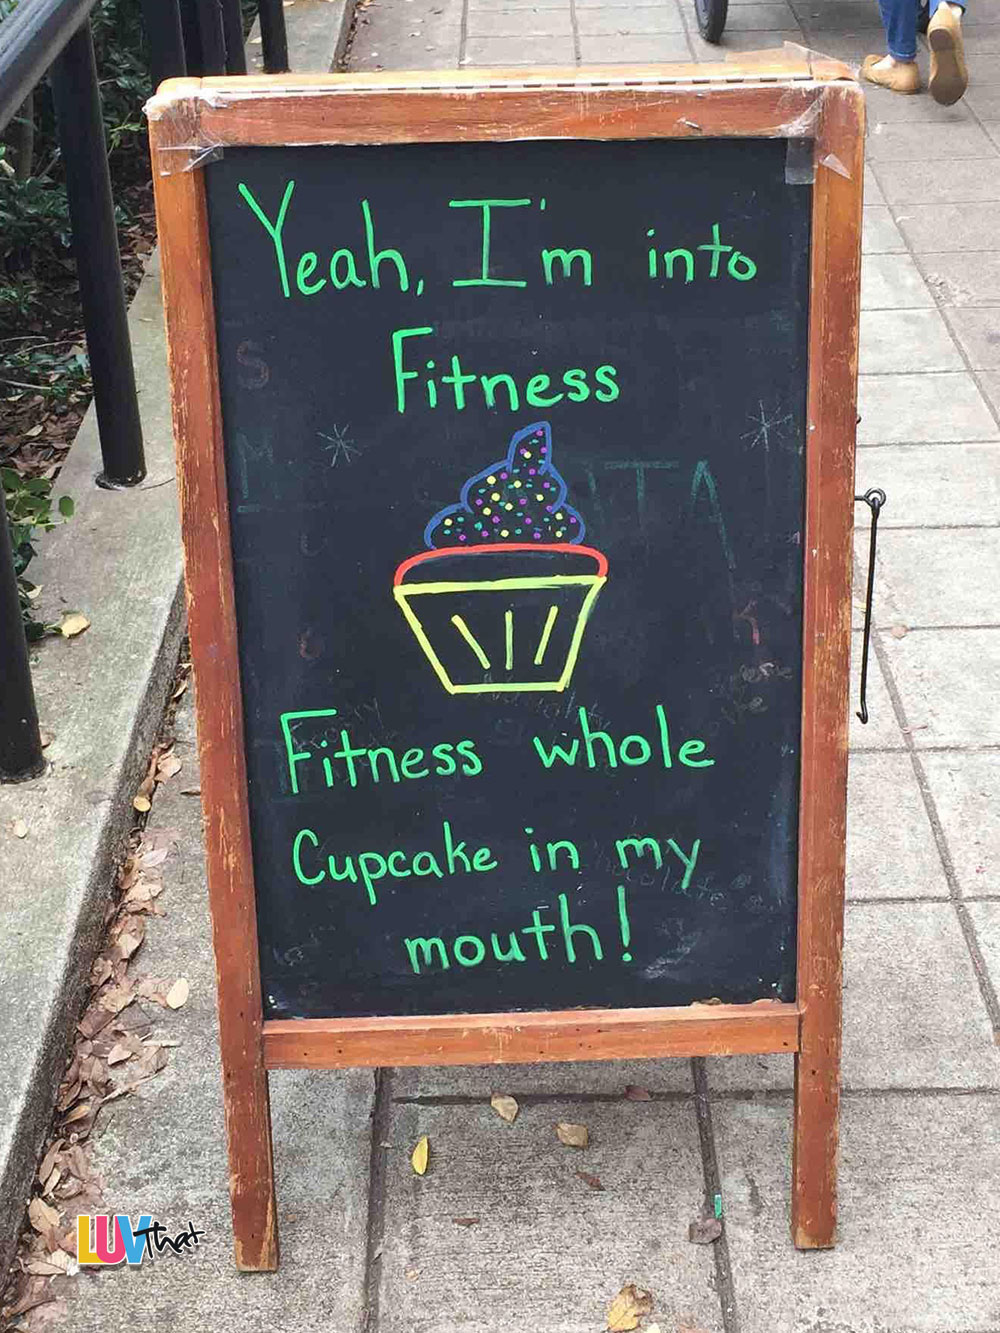 in to fitness this whole cupcake in my mouth